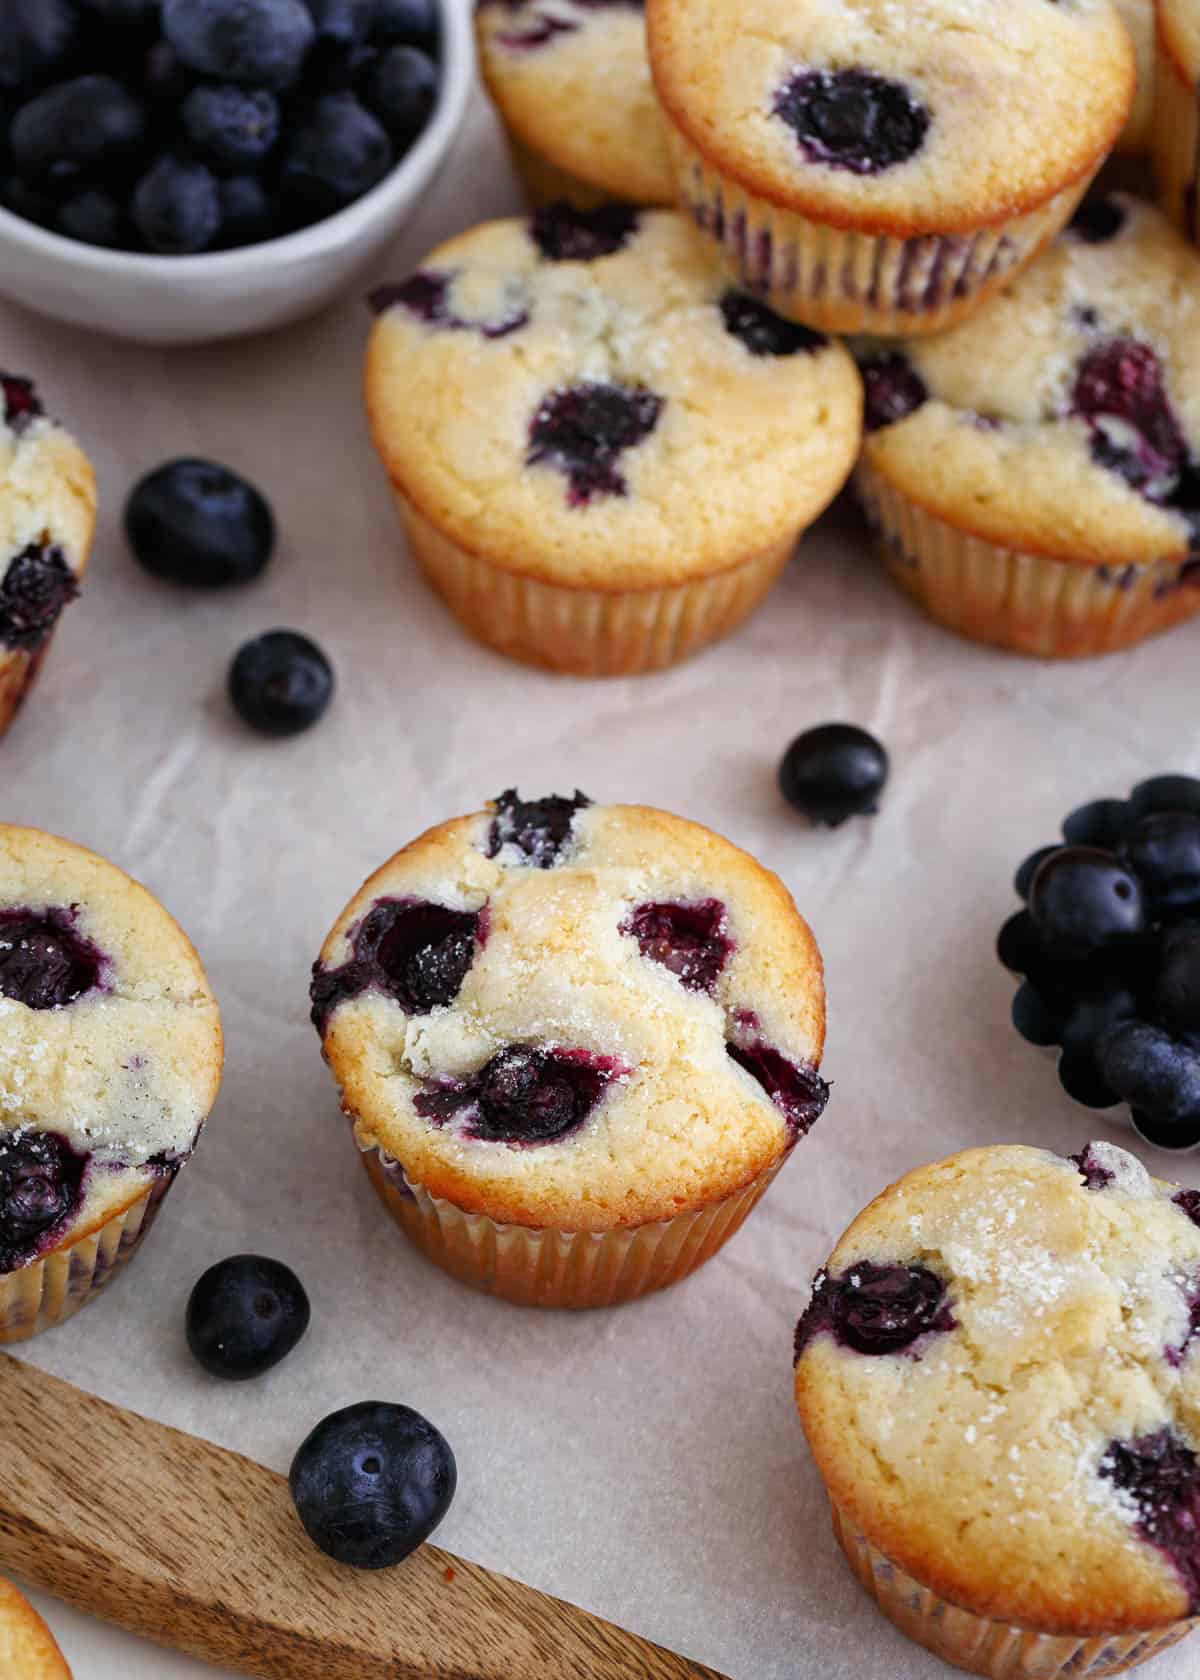 Blueberry muffins on wooden board.